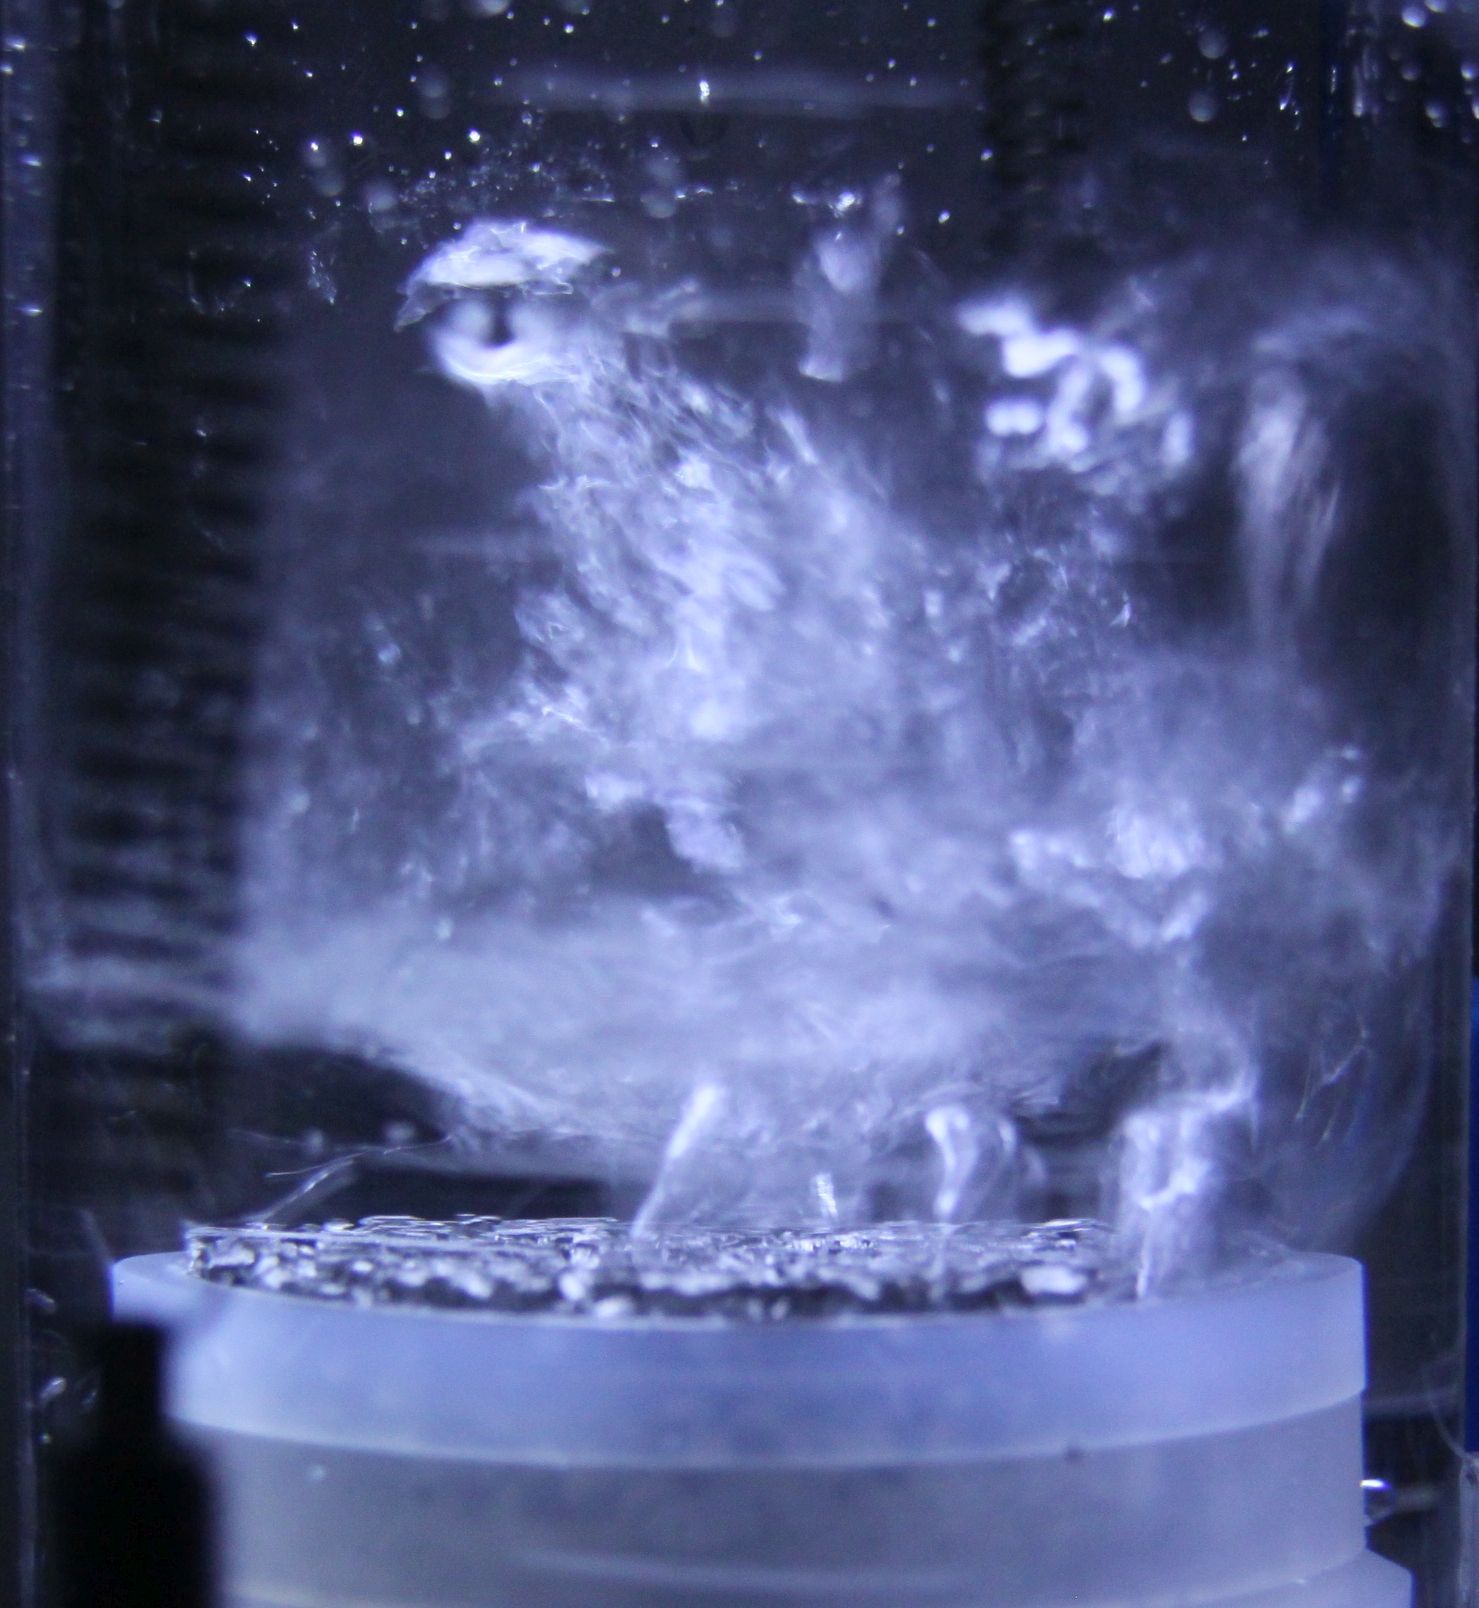 Boiling water in low pressure region (10-20 mbar) induced by a porous boiling structure